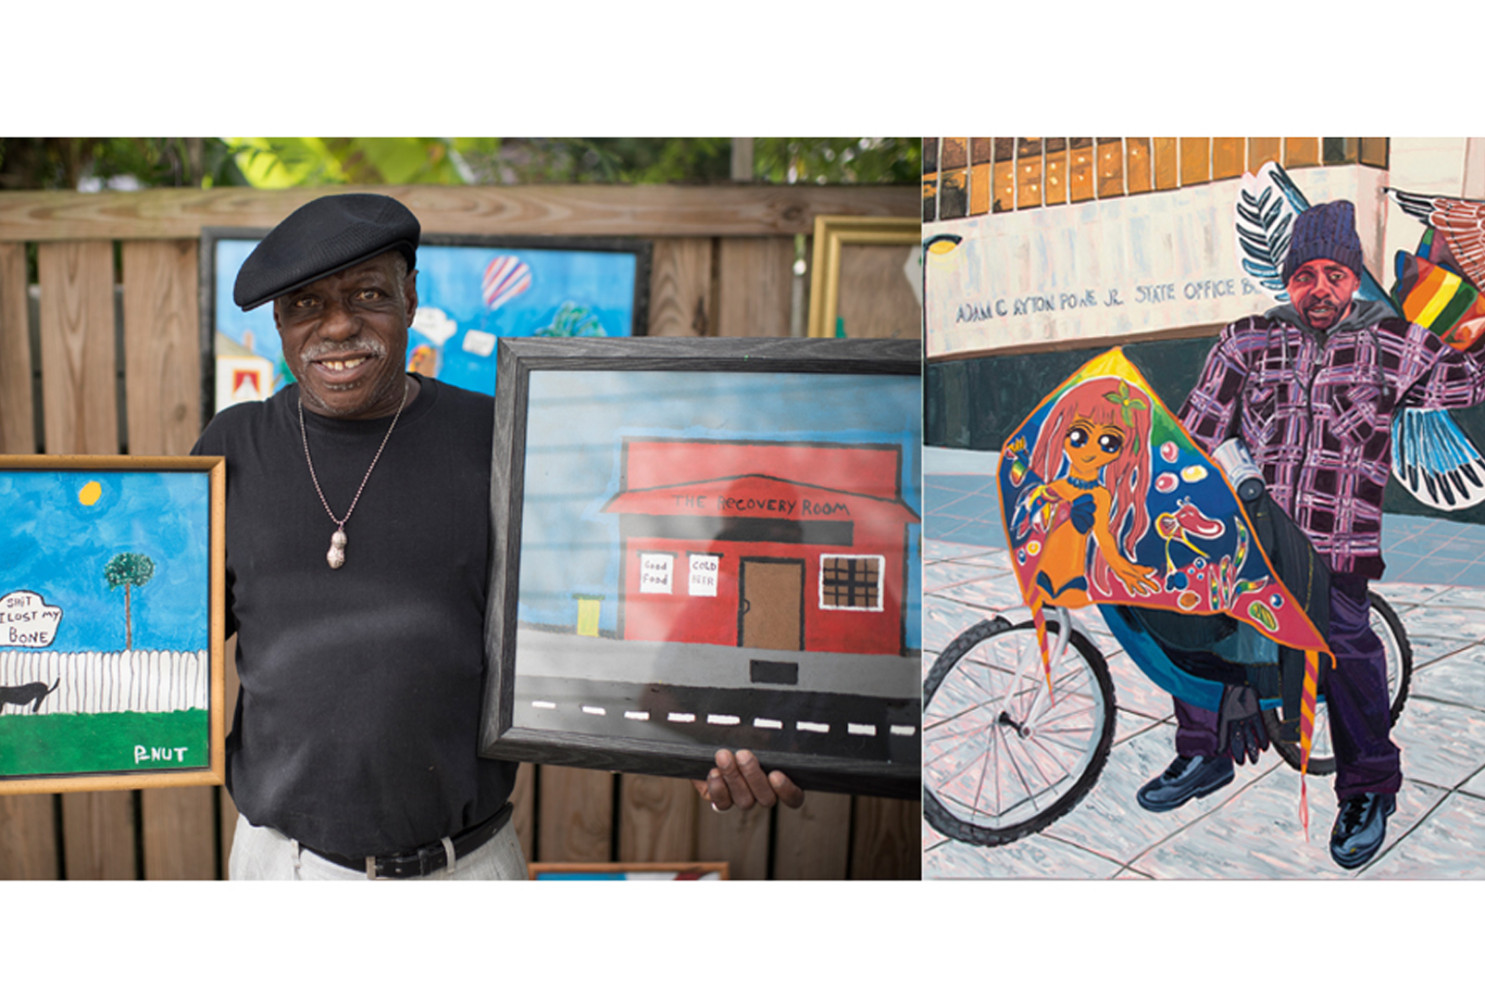 Left: P-Nut; Right: Kevin the Kiteman, 2016, by Jordan Casteel; oil on canvas; 78 x 78 inches; The Studio Museum in Harlem; Museum purchase with funds provided by the Acquisition Committee, 2016.37; ©Jordan Casteel; Courtesy American Federation of Arts
